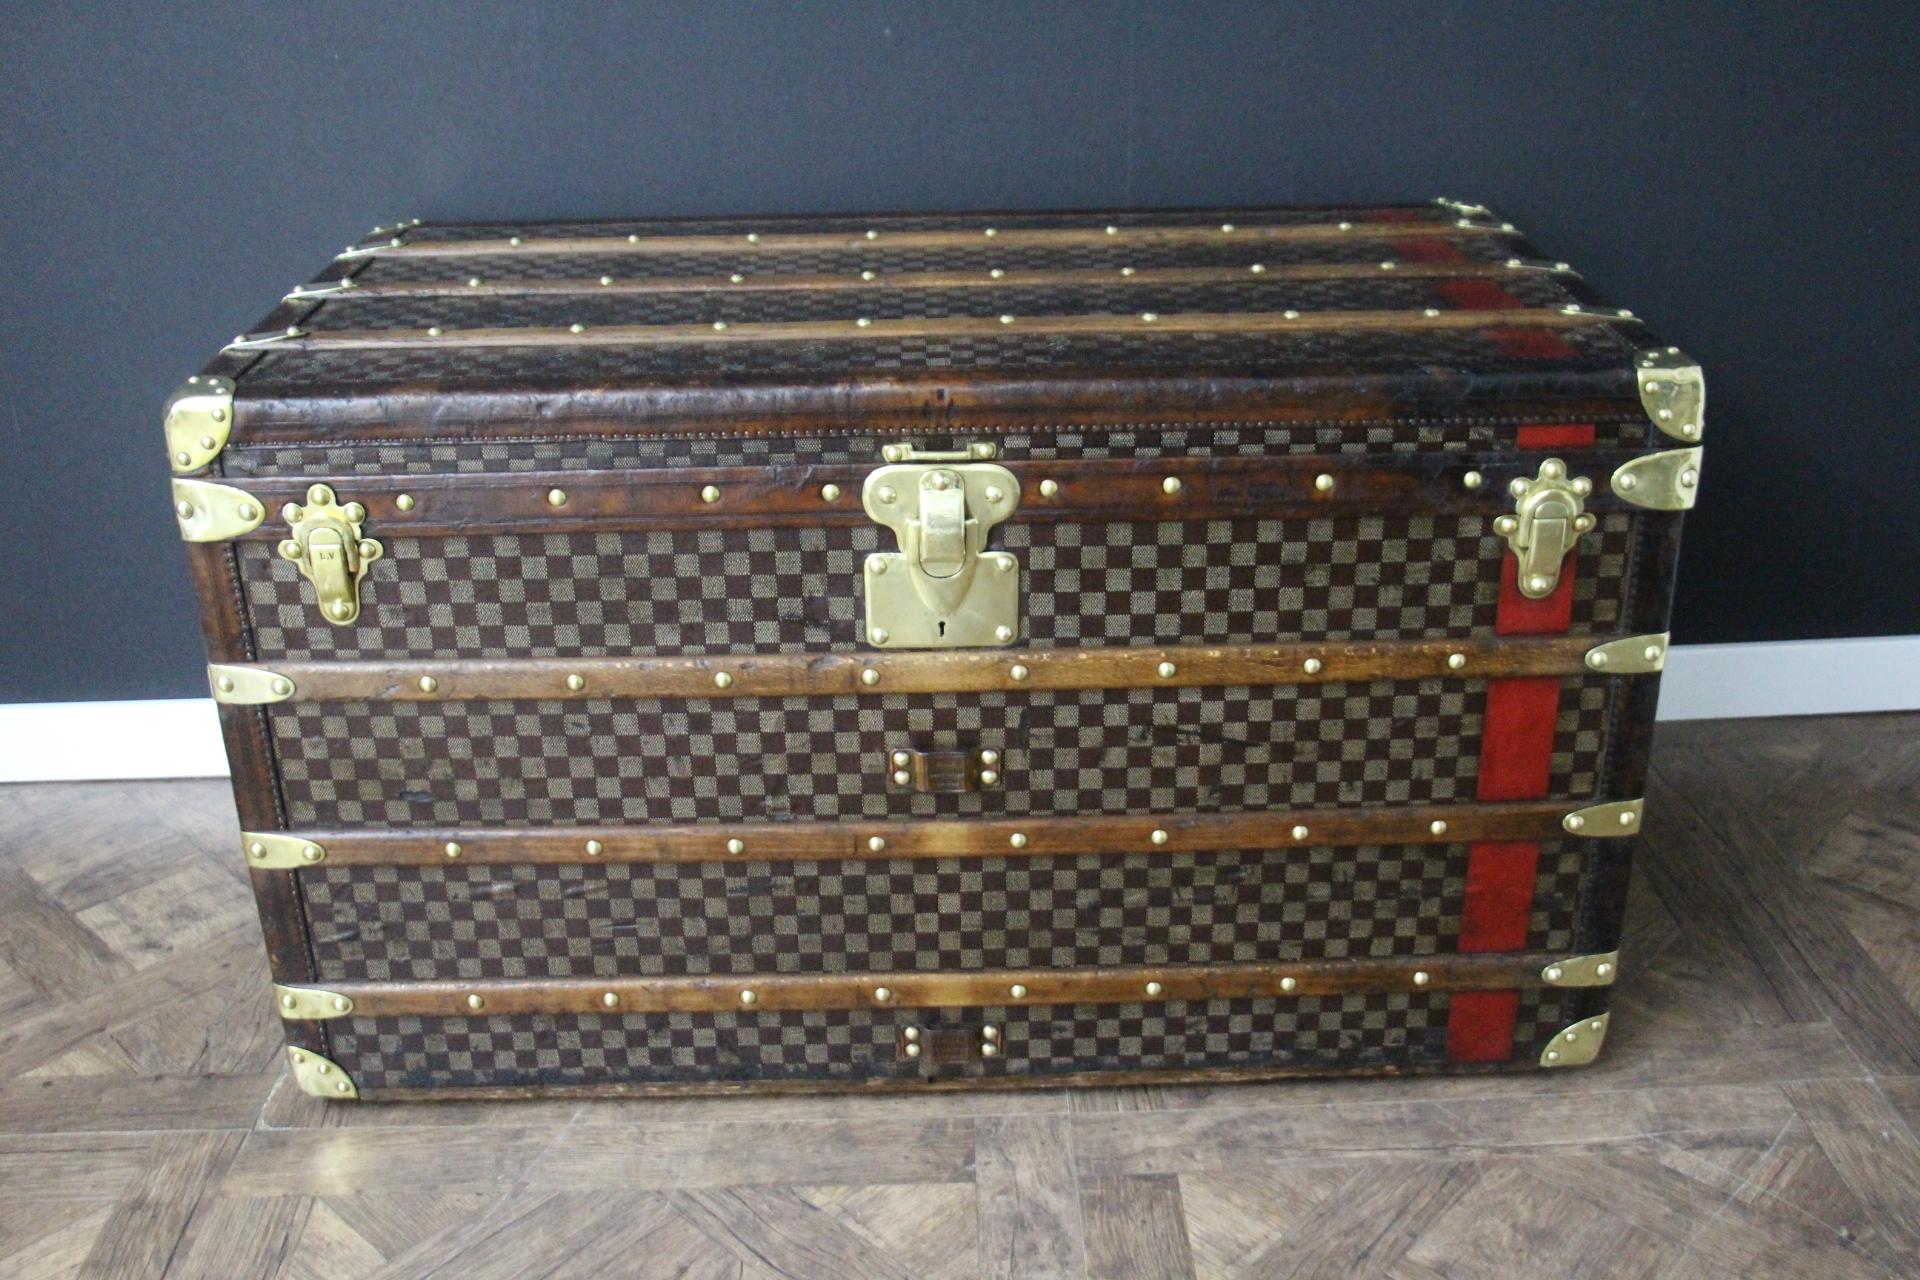 This Vuitton trunk is one of the rarer Louis Vuitton trunks to be offered currently. Indeed , it features the world famous and sought after damier (checkerboard) canvas. Dating to 1889, it is a wonderful example of such luxury trunks. Thanks to its